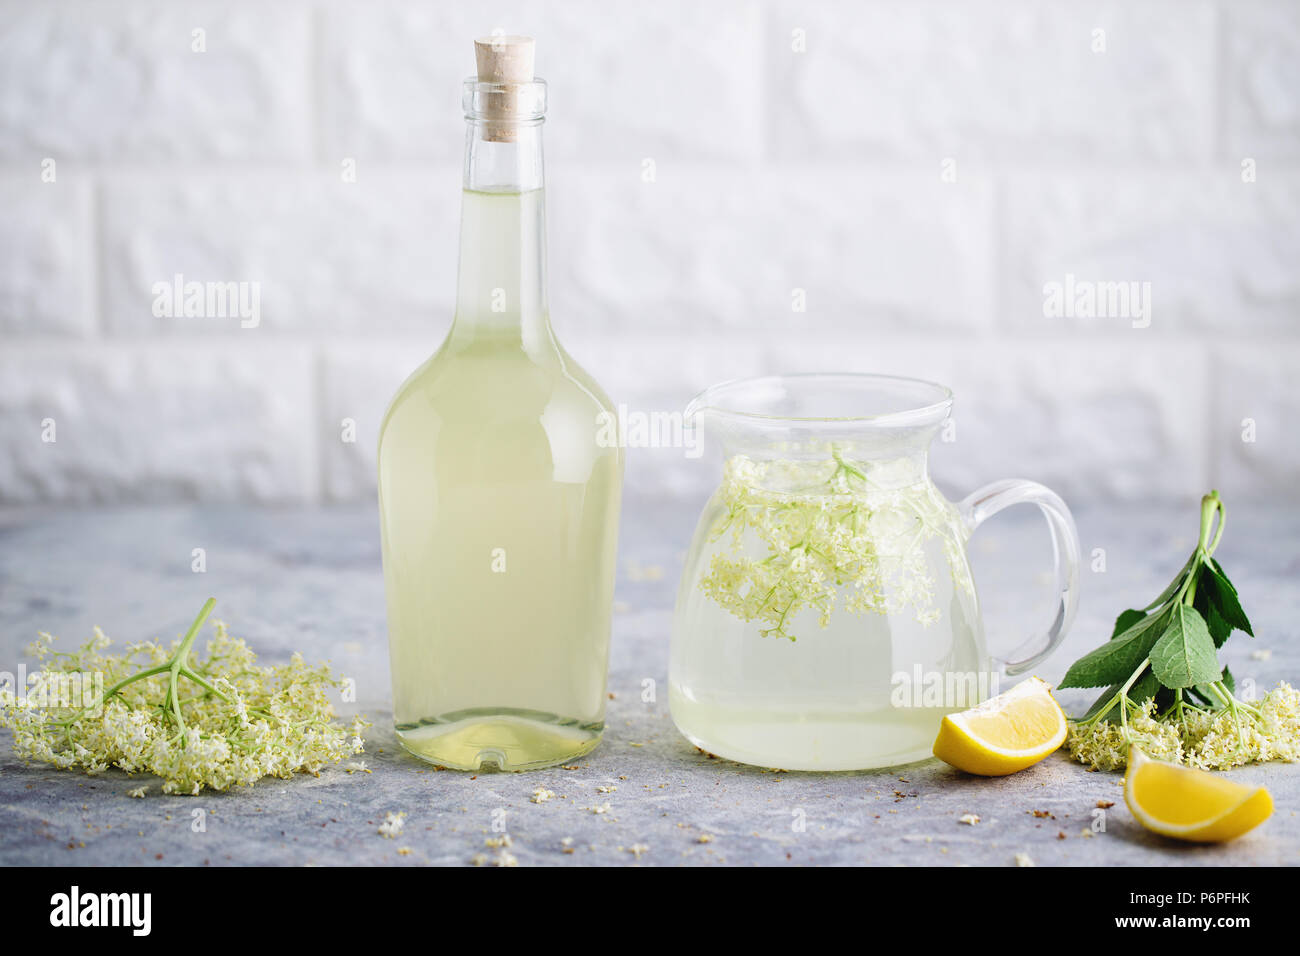 Homemade elderflower lemonade with freshly picked elderflowers. The flowers are edible and can be used to add flavour and aroma to both drinks and des Stock Photo